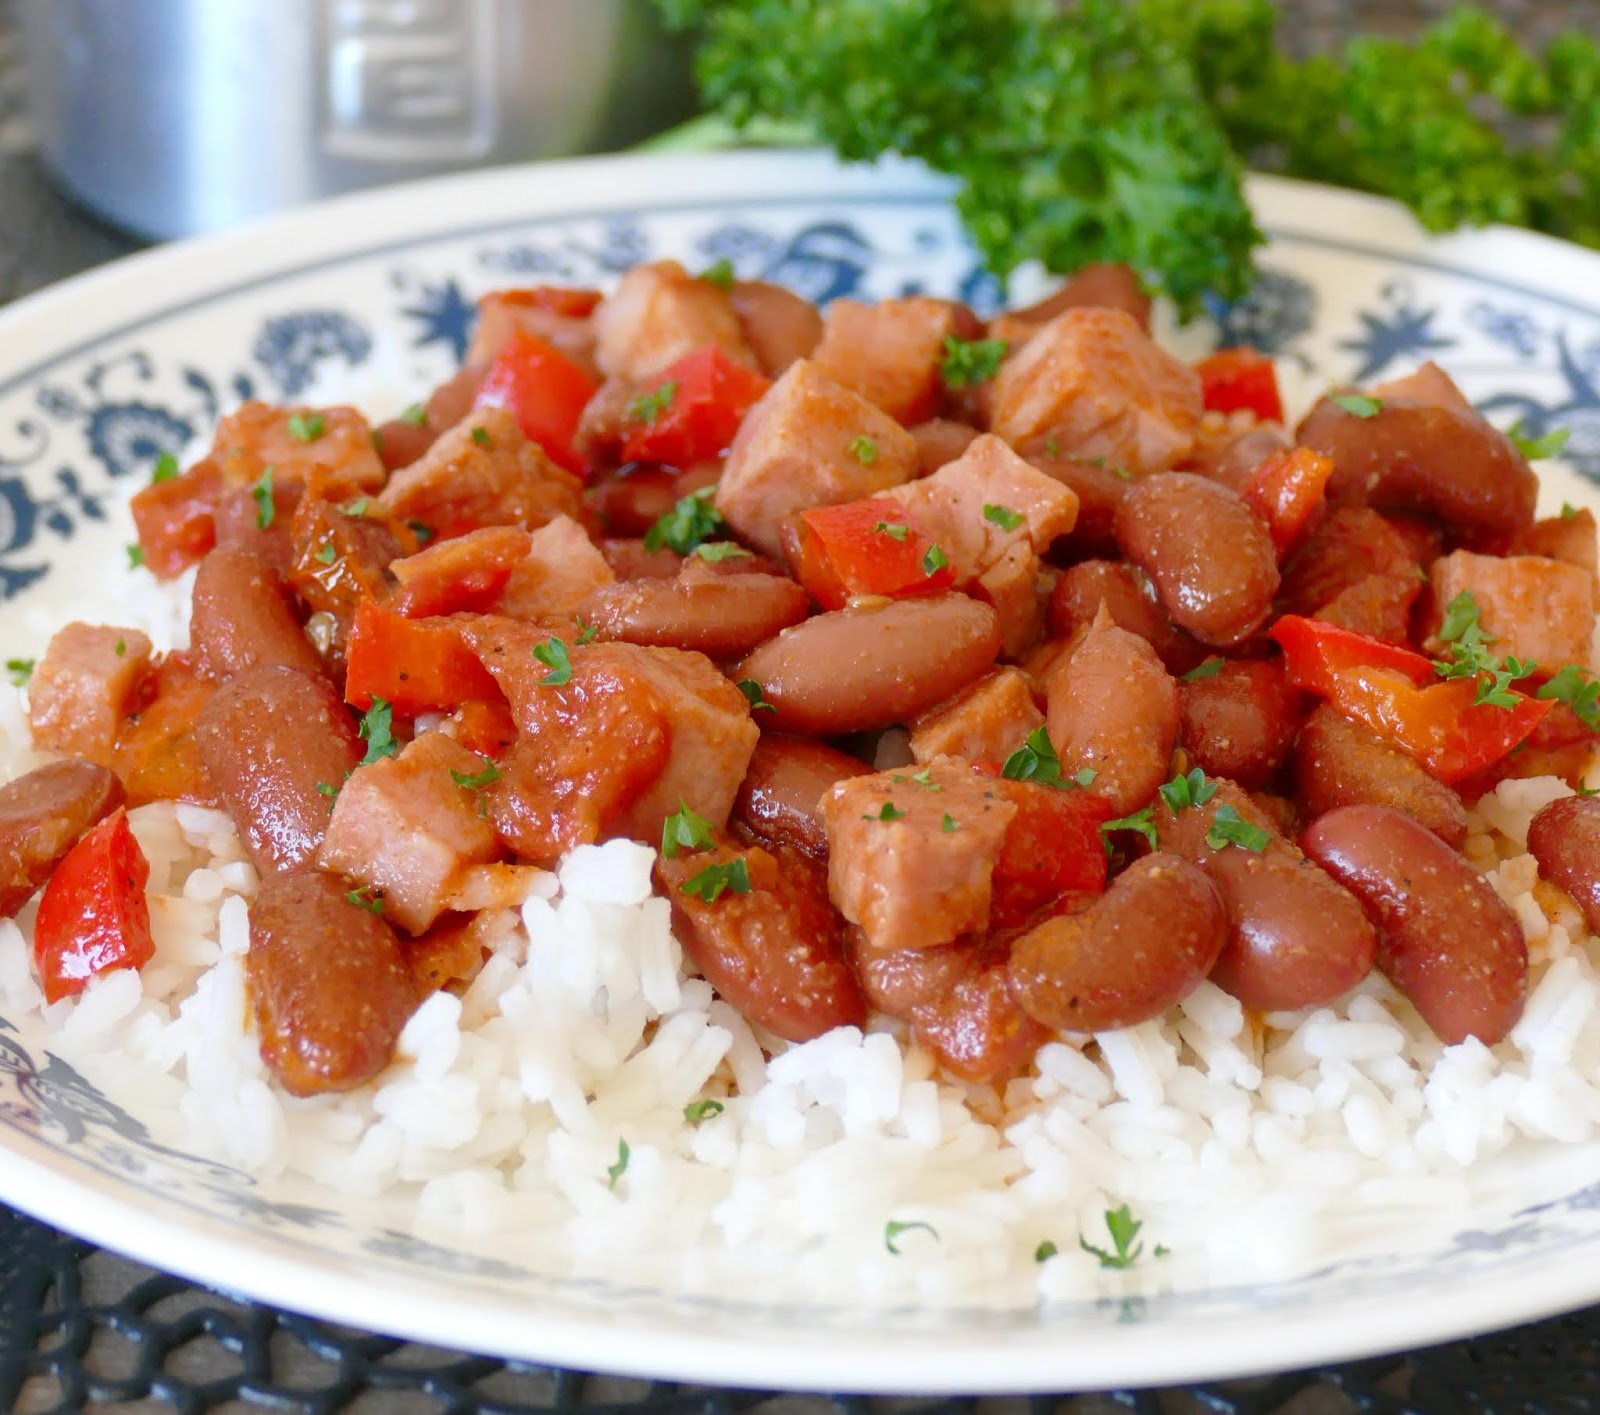 This simple homemade red beans and rice can be made with ham or smoked turkey. It uses fridge and pantry staples like bell pepper, fresh tomatoes, spices, broth and canned beans and is so hearty and absolutely delicious! Great for meal planning and budget friendly!